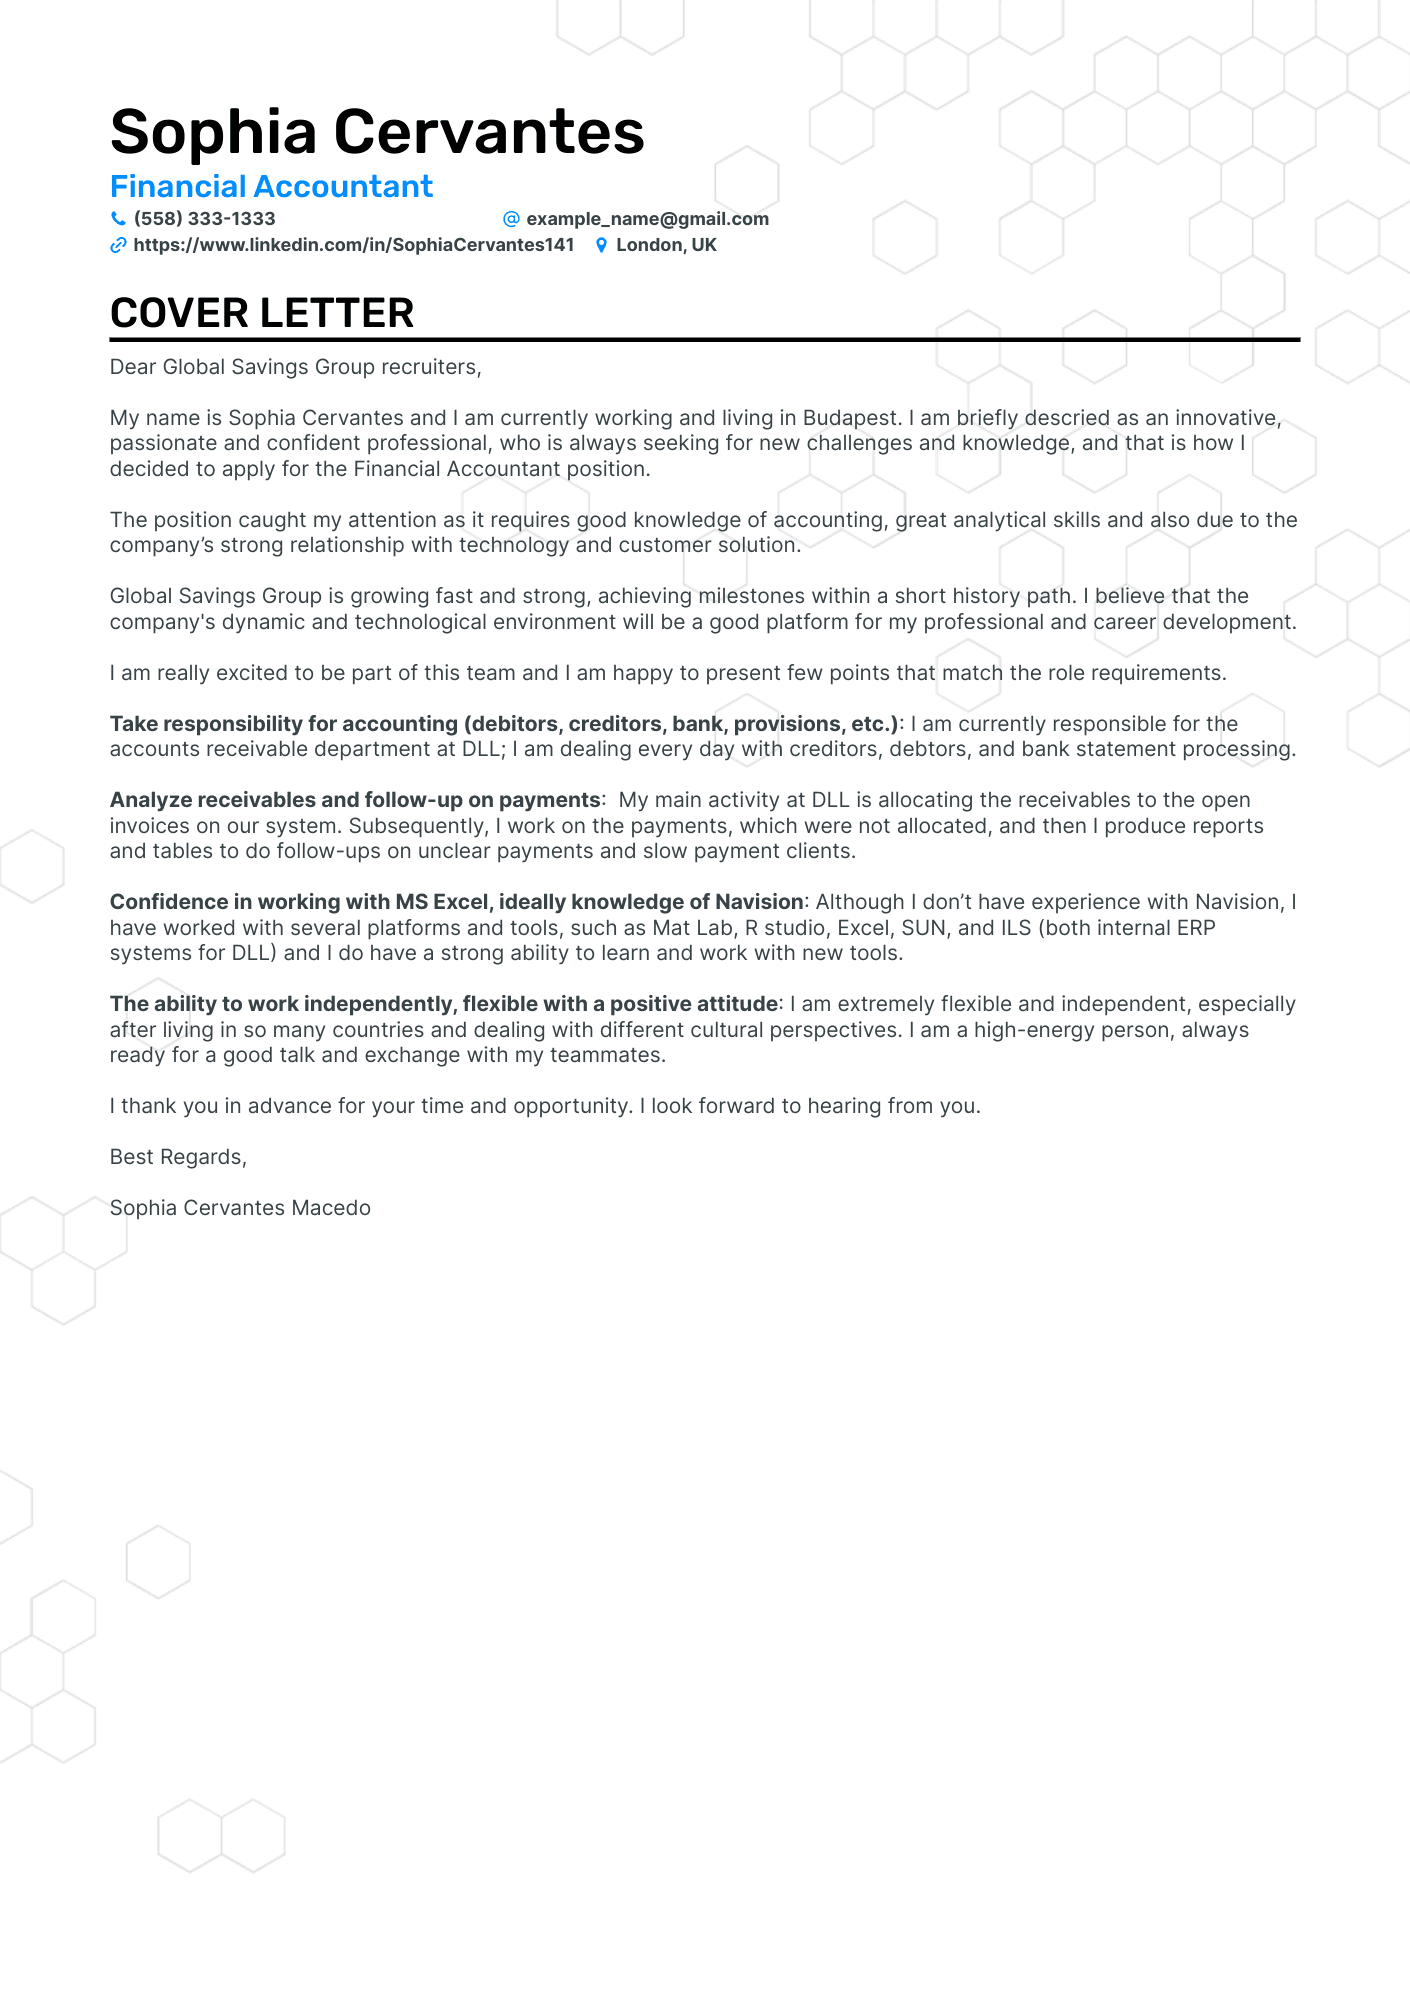 Financial Accountant cover letter